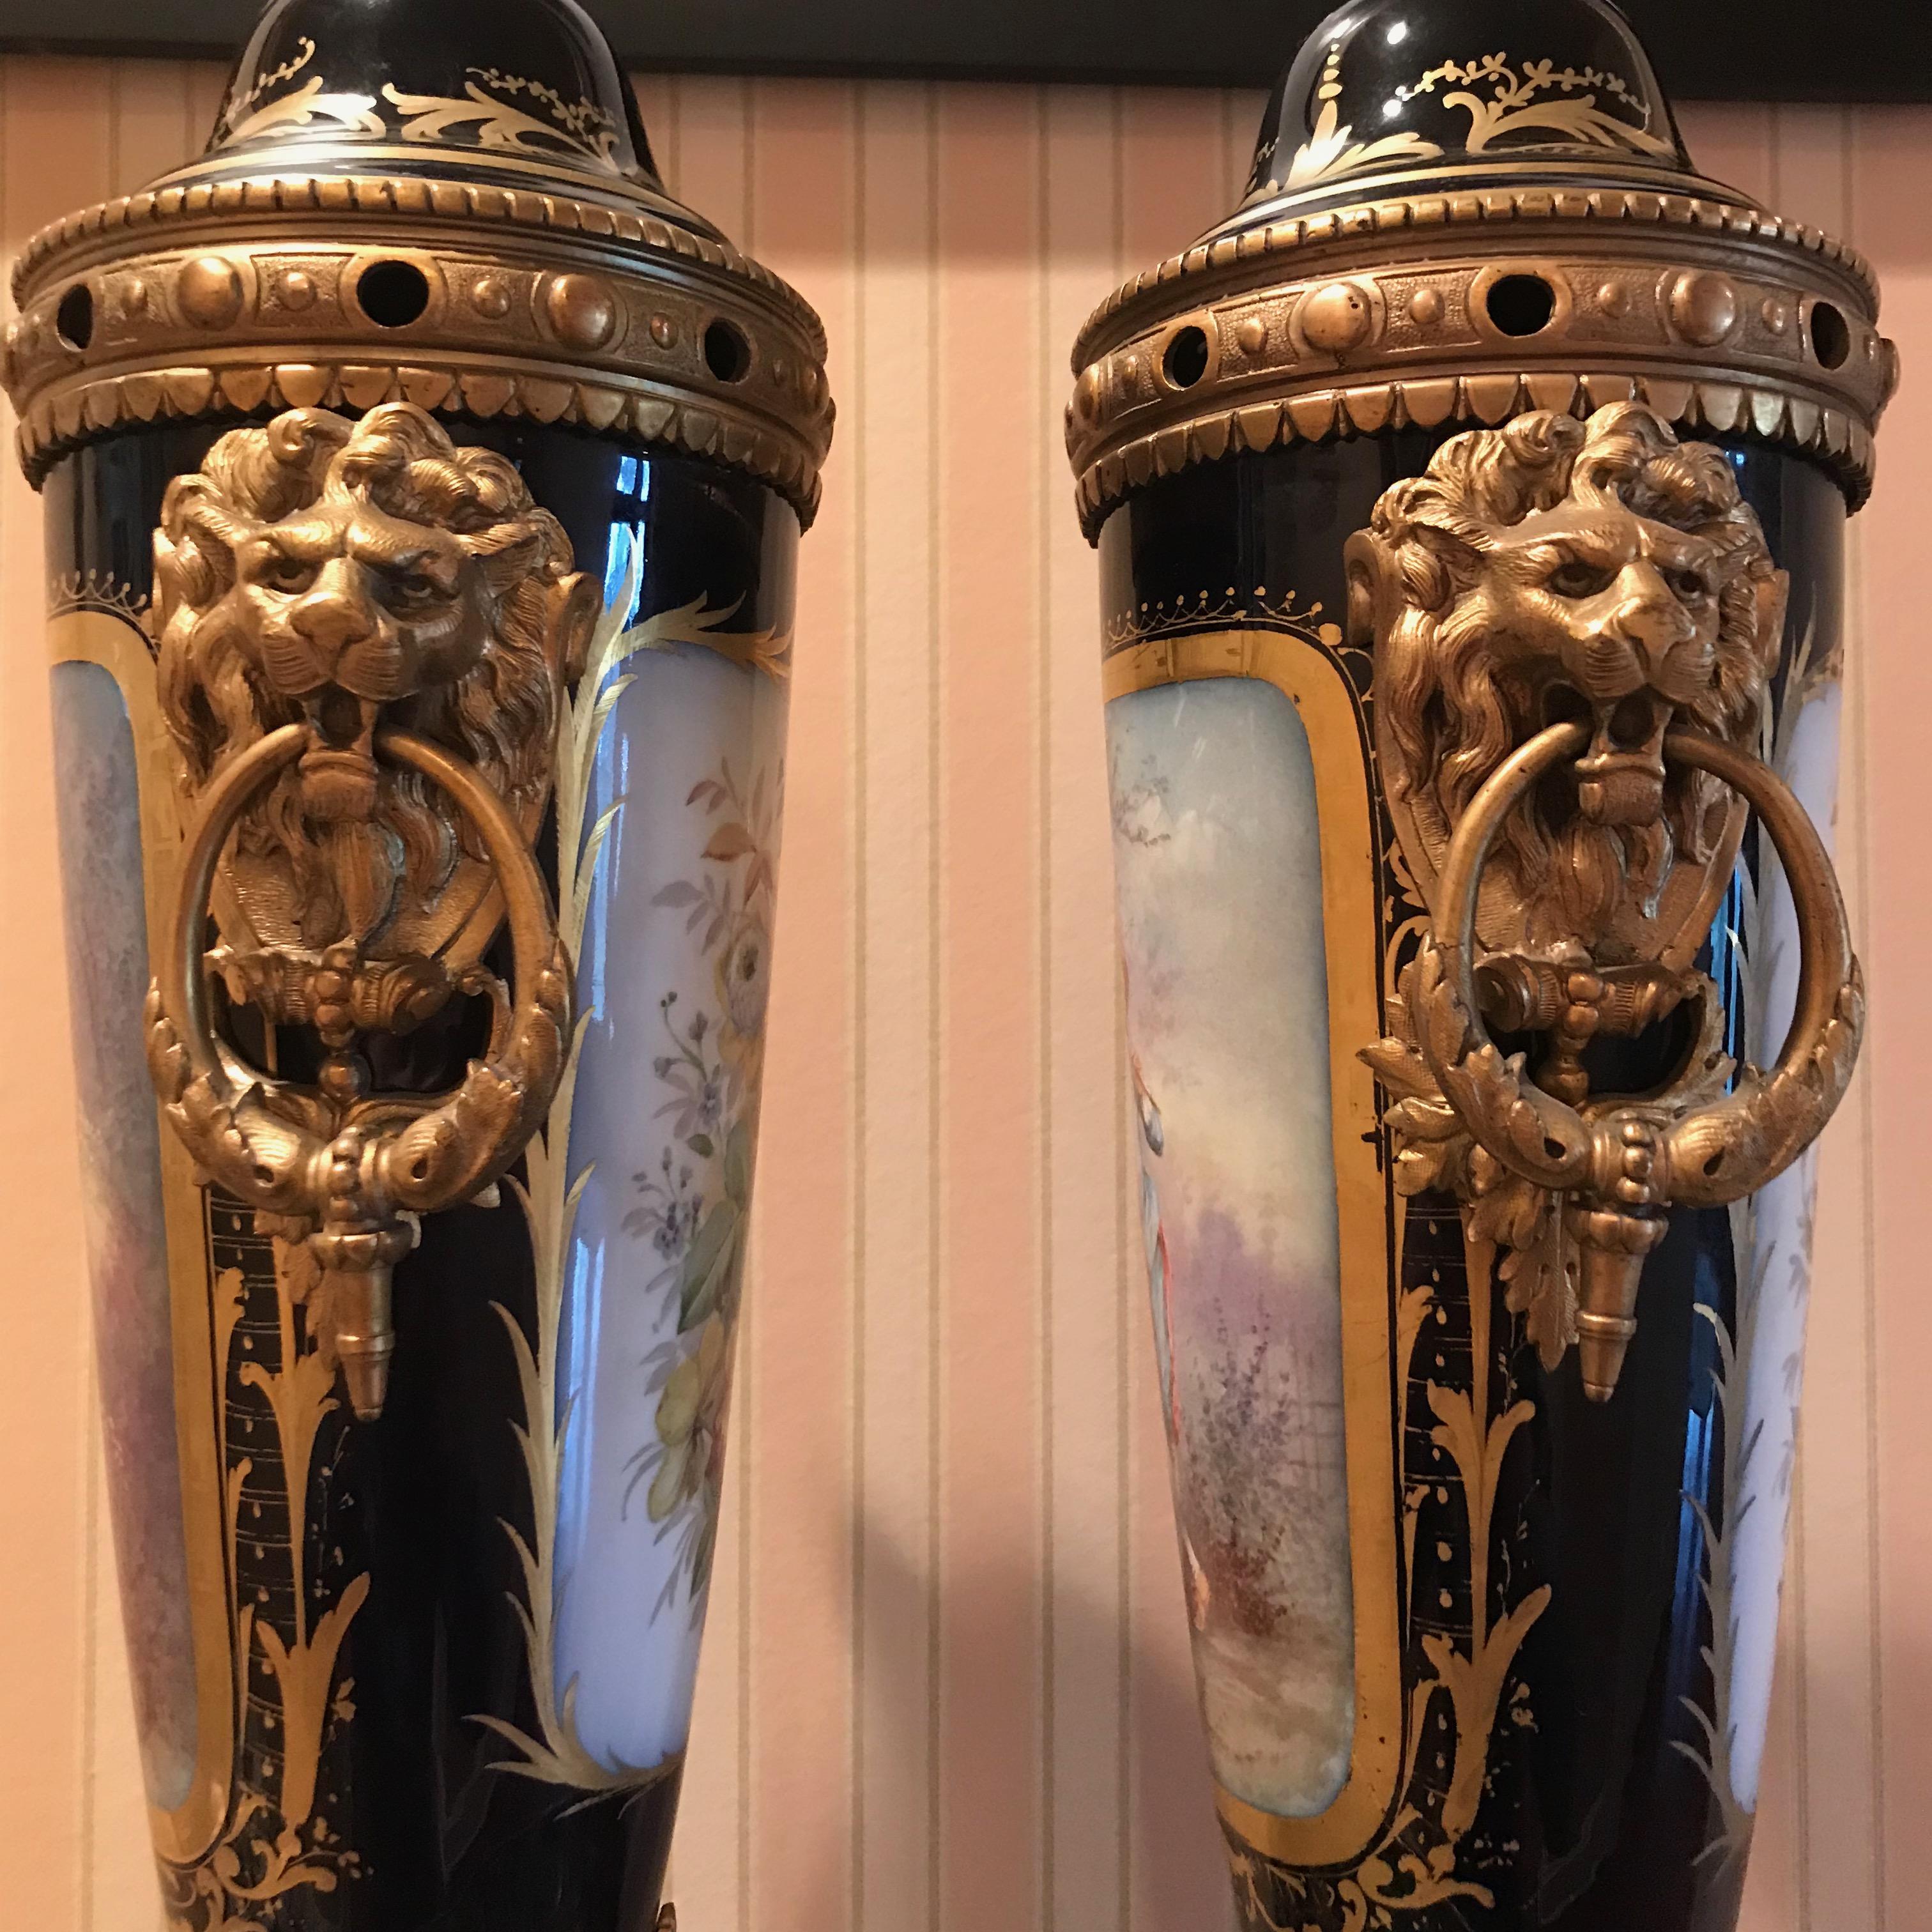 A pair of late 19th century Sèvres Porcelain lidded garniture vases with gilt bronze mounts. The tall tapered bodies decorated with hand painted scenic panels depicting a lady and gentleman wearing 18th century style costume in romantic garden